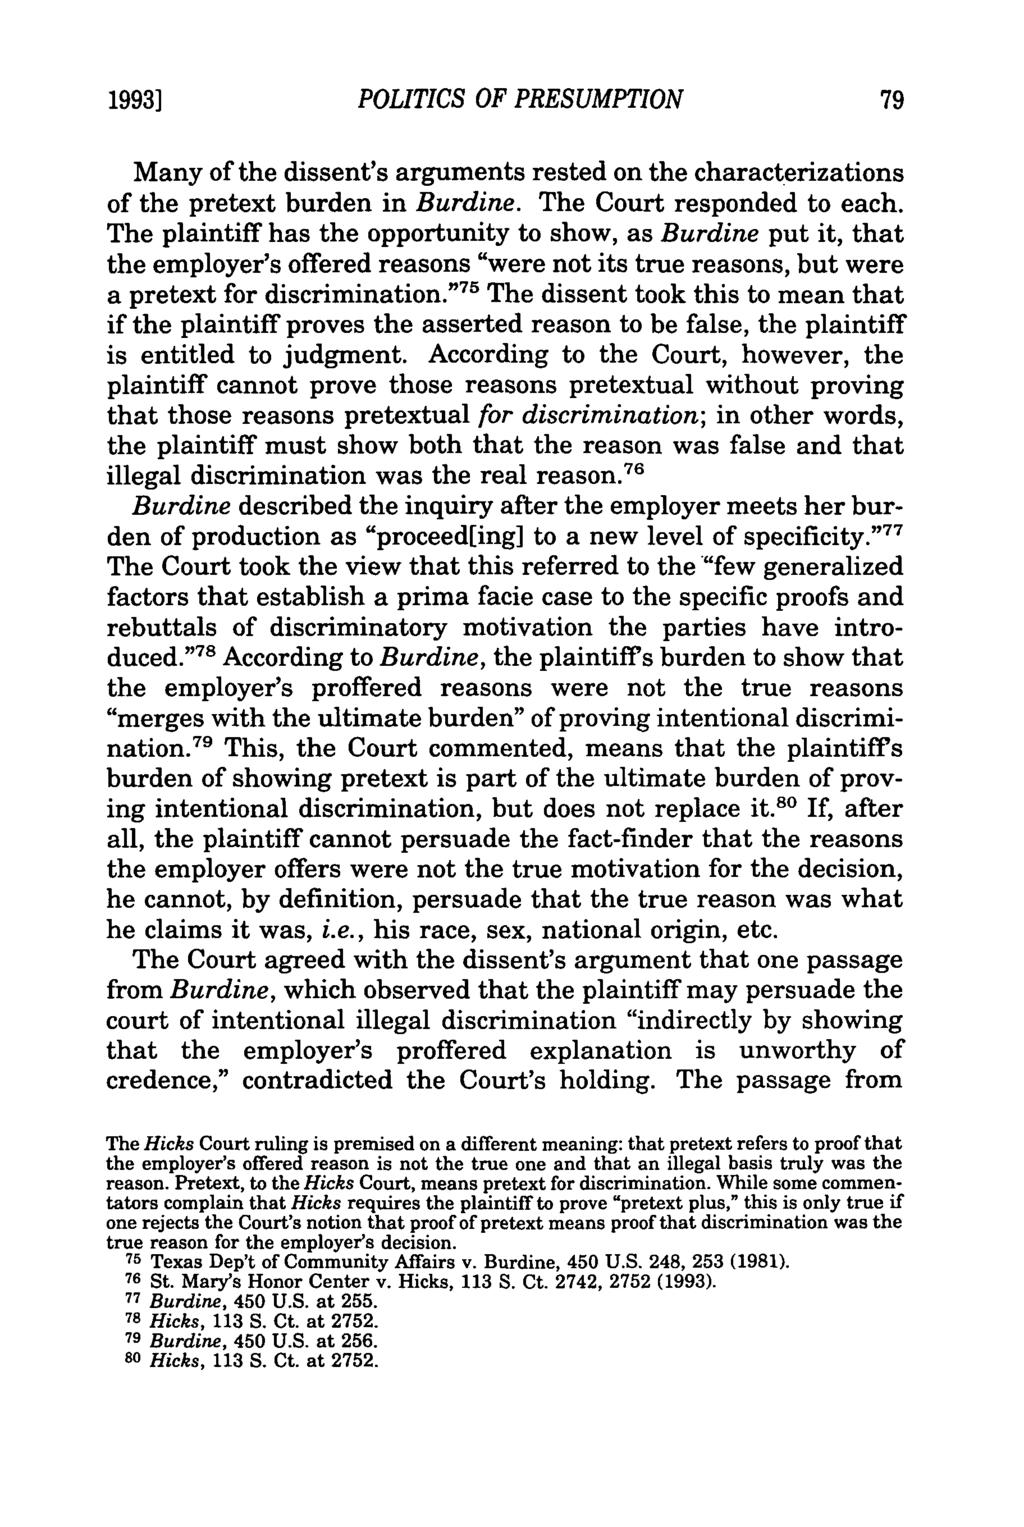 19931 POLITICS OF PRESUMPTION Many of the dissent's arguments rested on the characterizations of the pretext burden in Burdine. The Court responded to each.